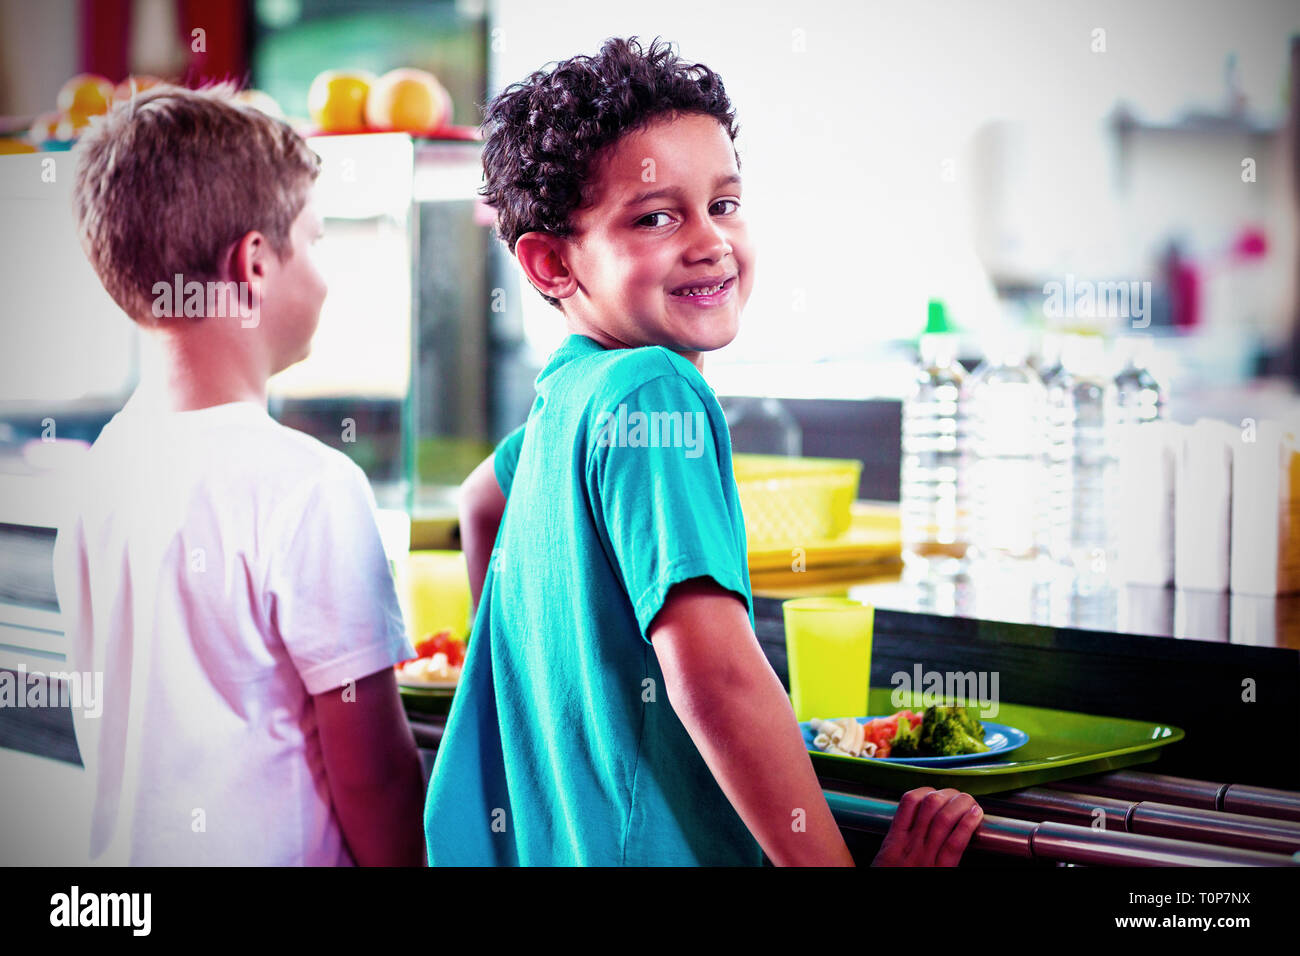 Schoolboy with classmate standing near canteen counter Stock Photo